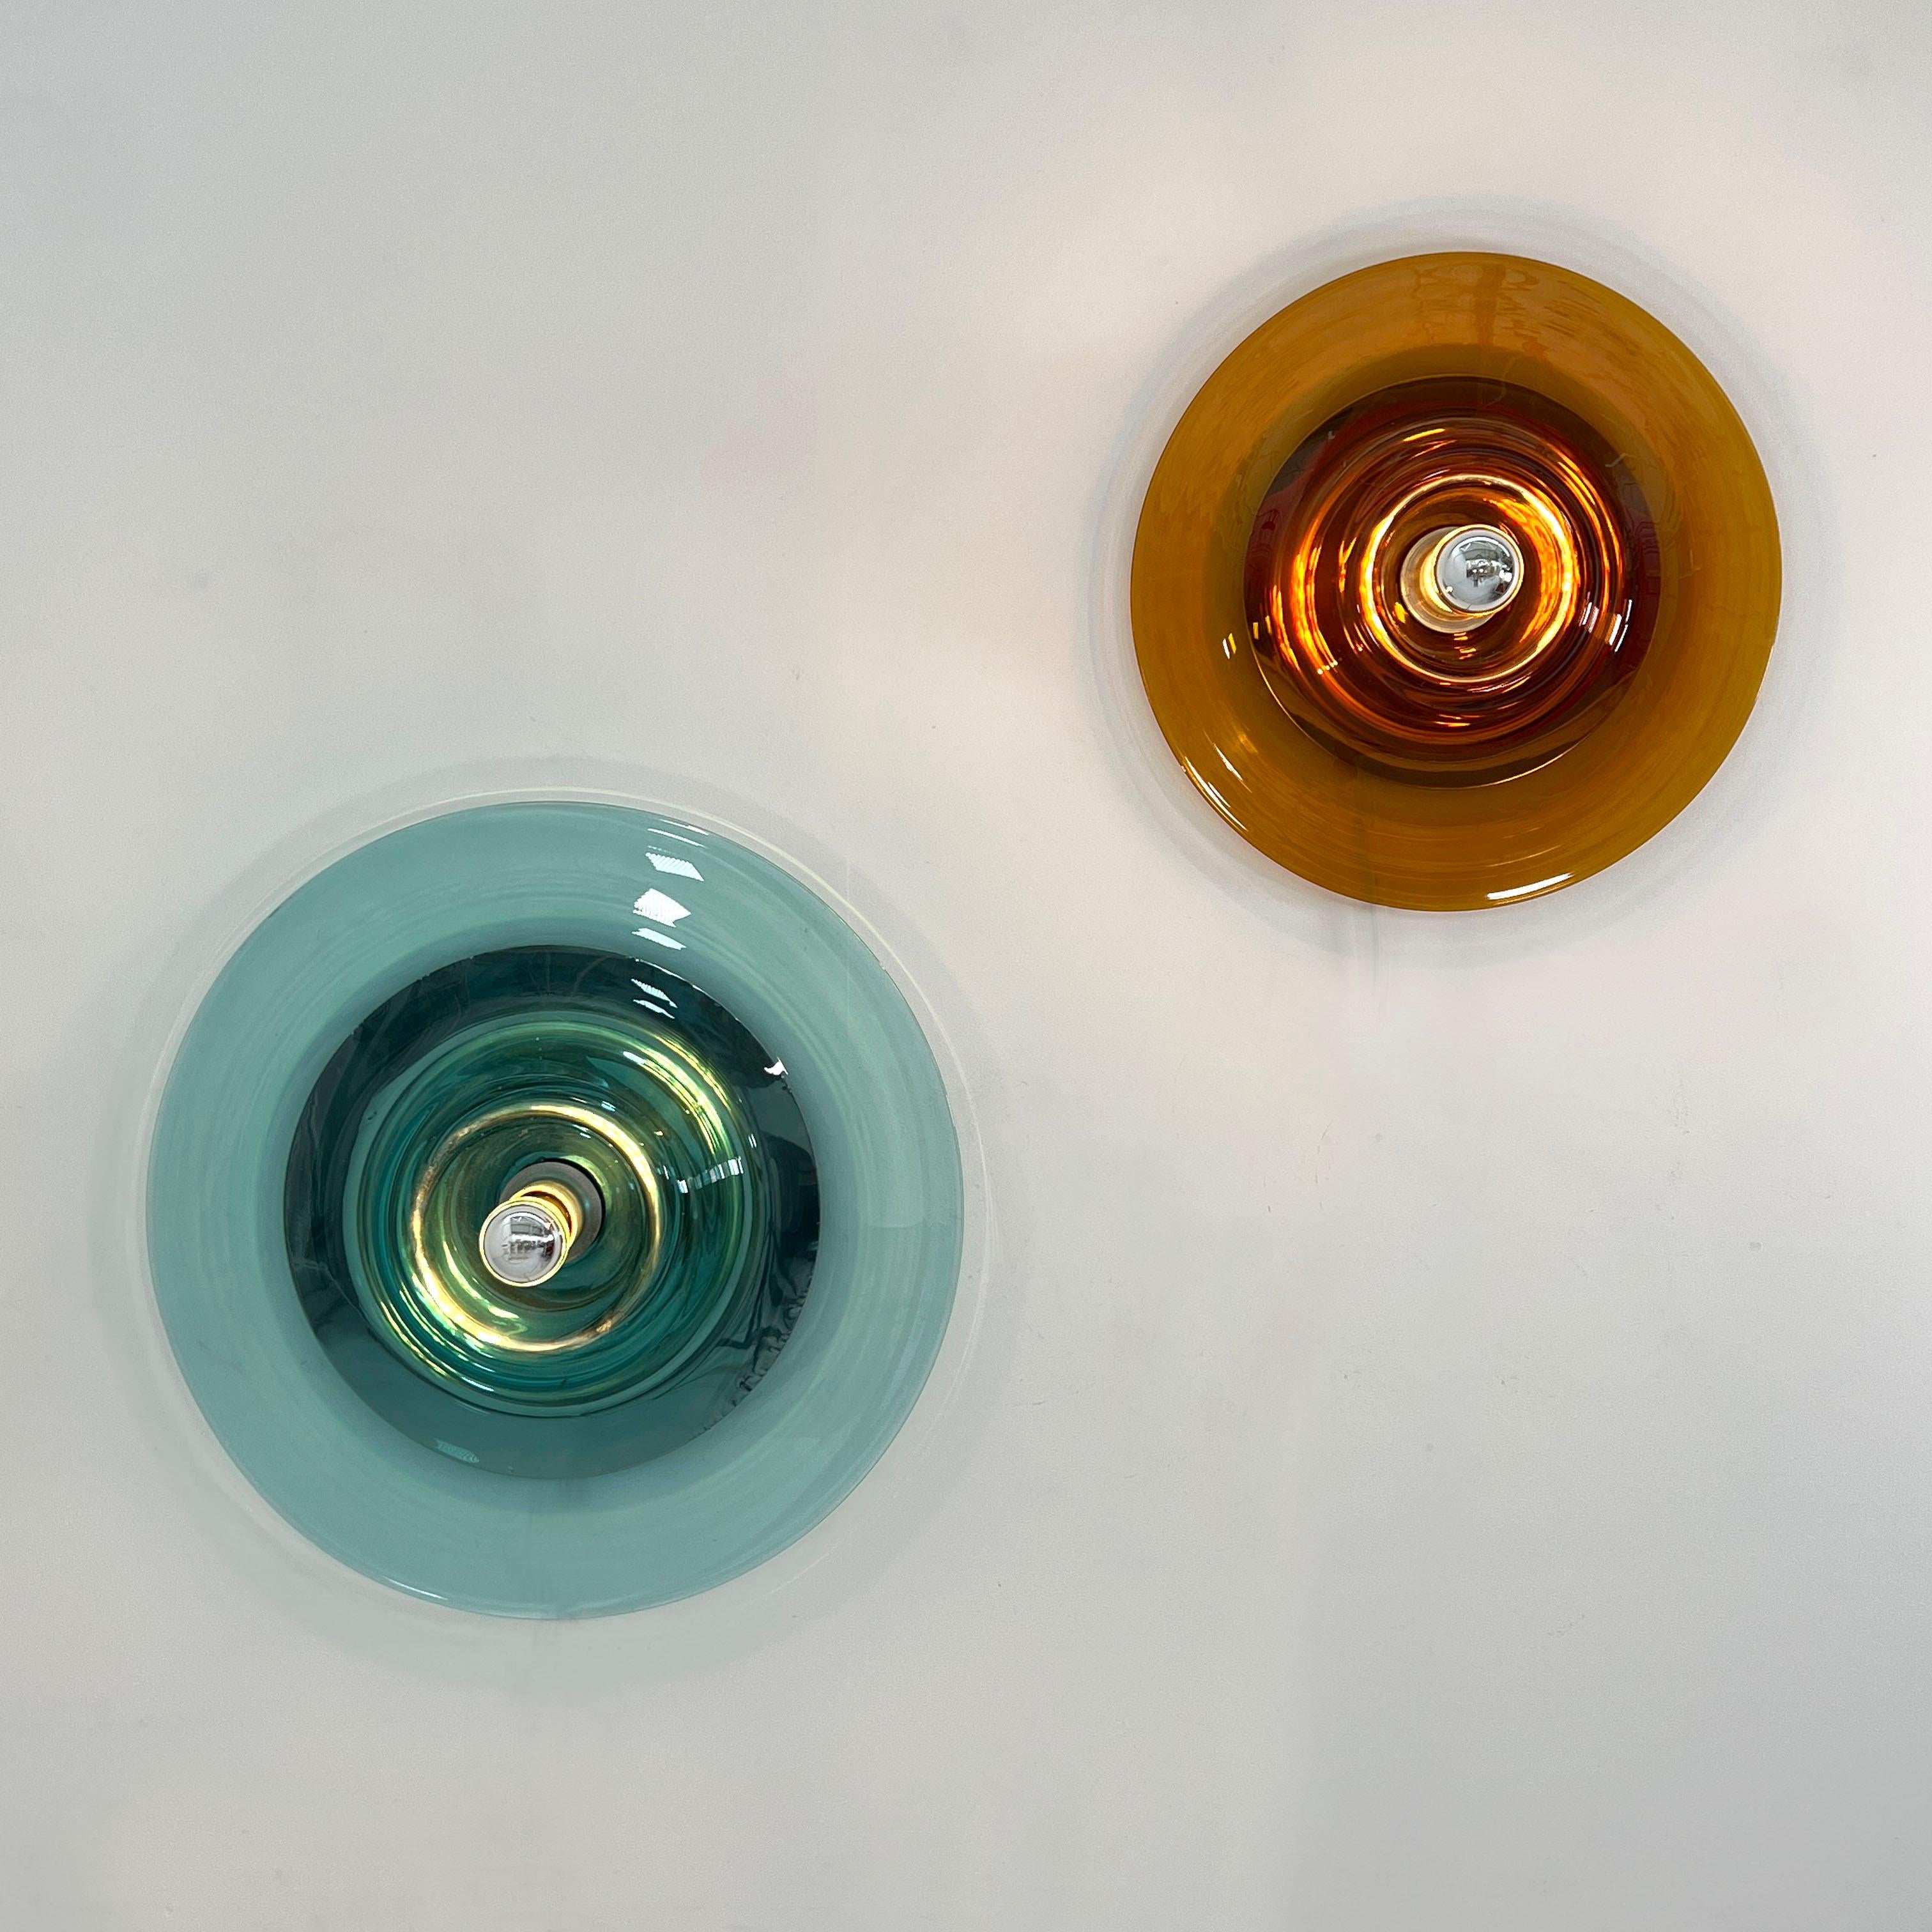 Pair of Wall Lamps in Murano Glass by Pierre Cardin for Venini, 1969

Designer - Pierre Cardin
Producer - Venini
Design Period - 1969
Measurements - Blue = Width 60 cm x Depth 13 cm x Height 60 cm. Amber = Width 45 cm x Depth 13 cm x Height 45